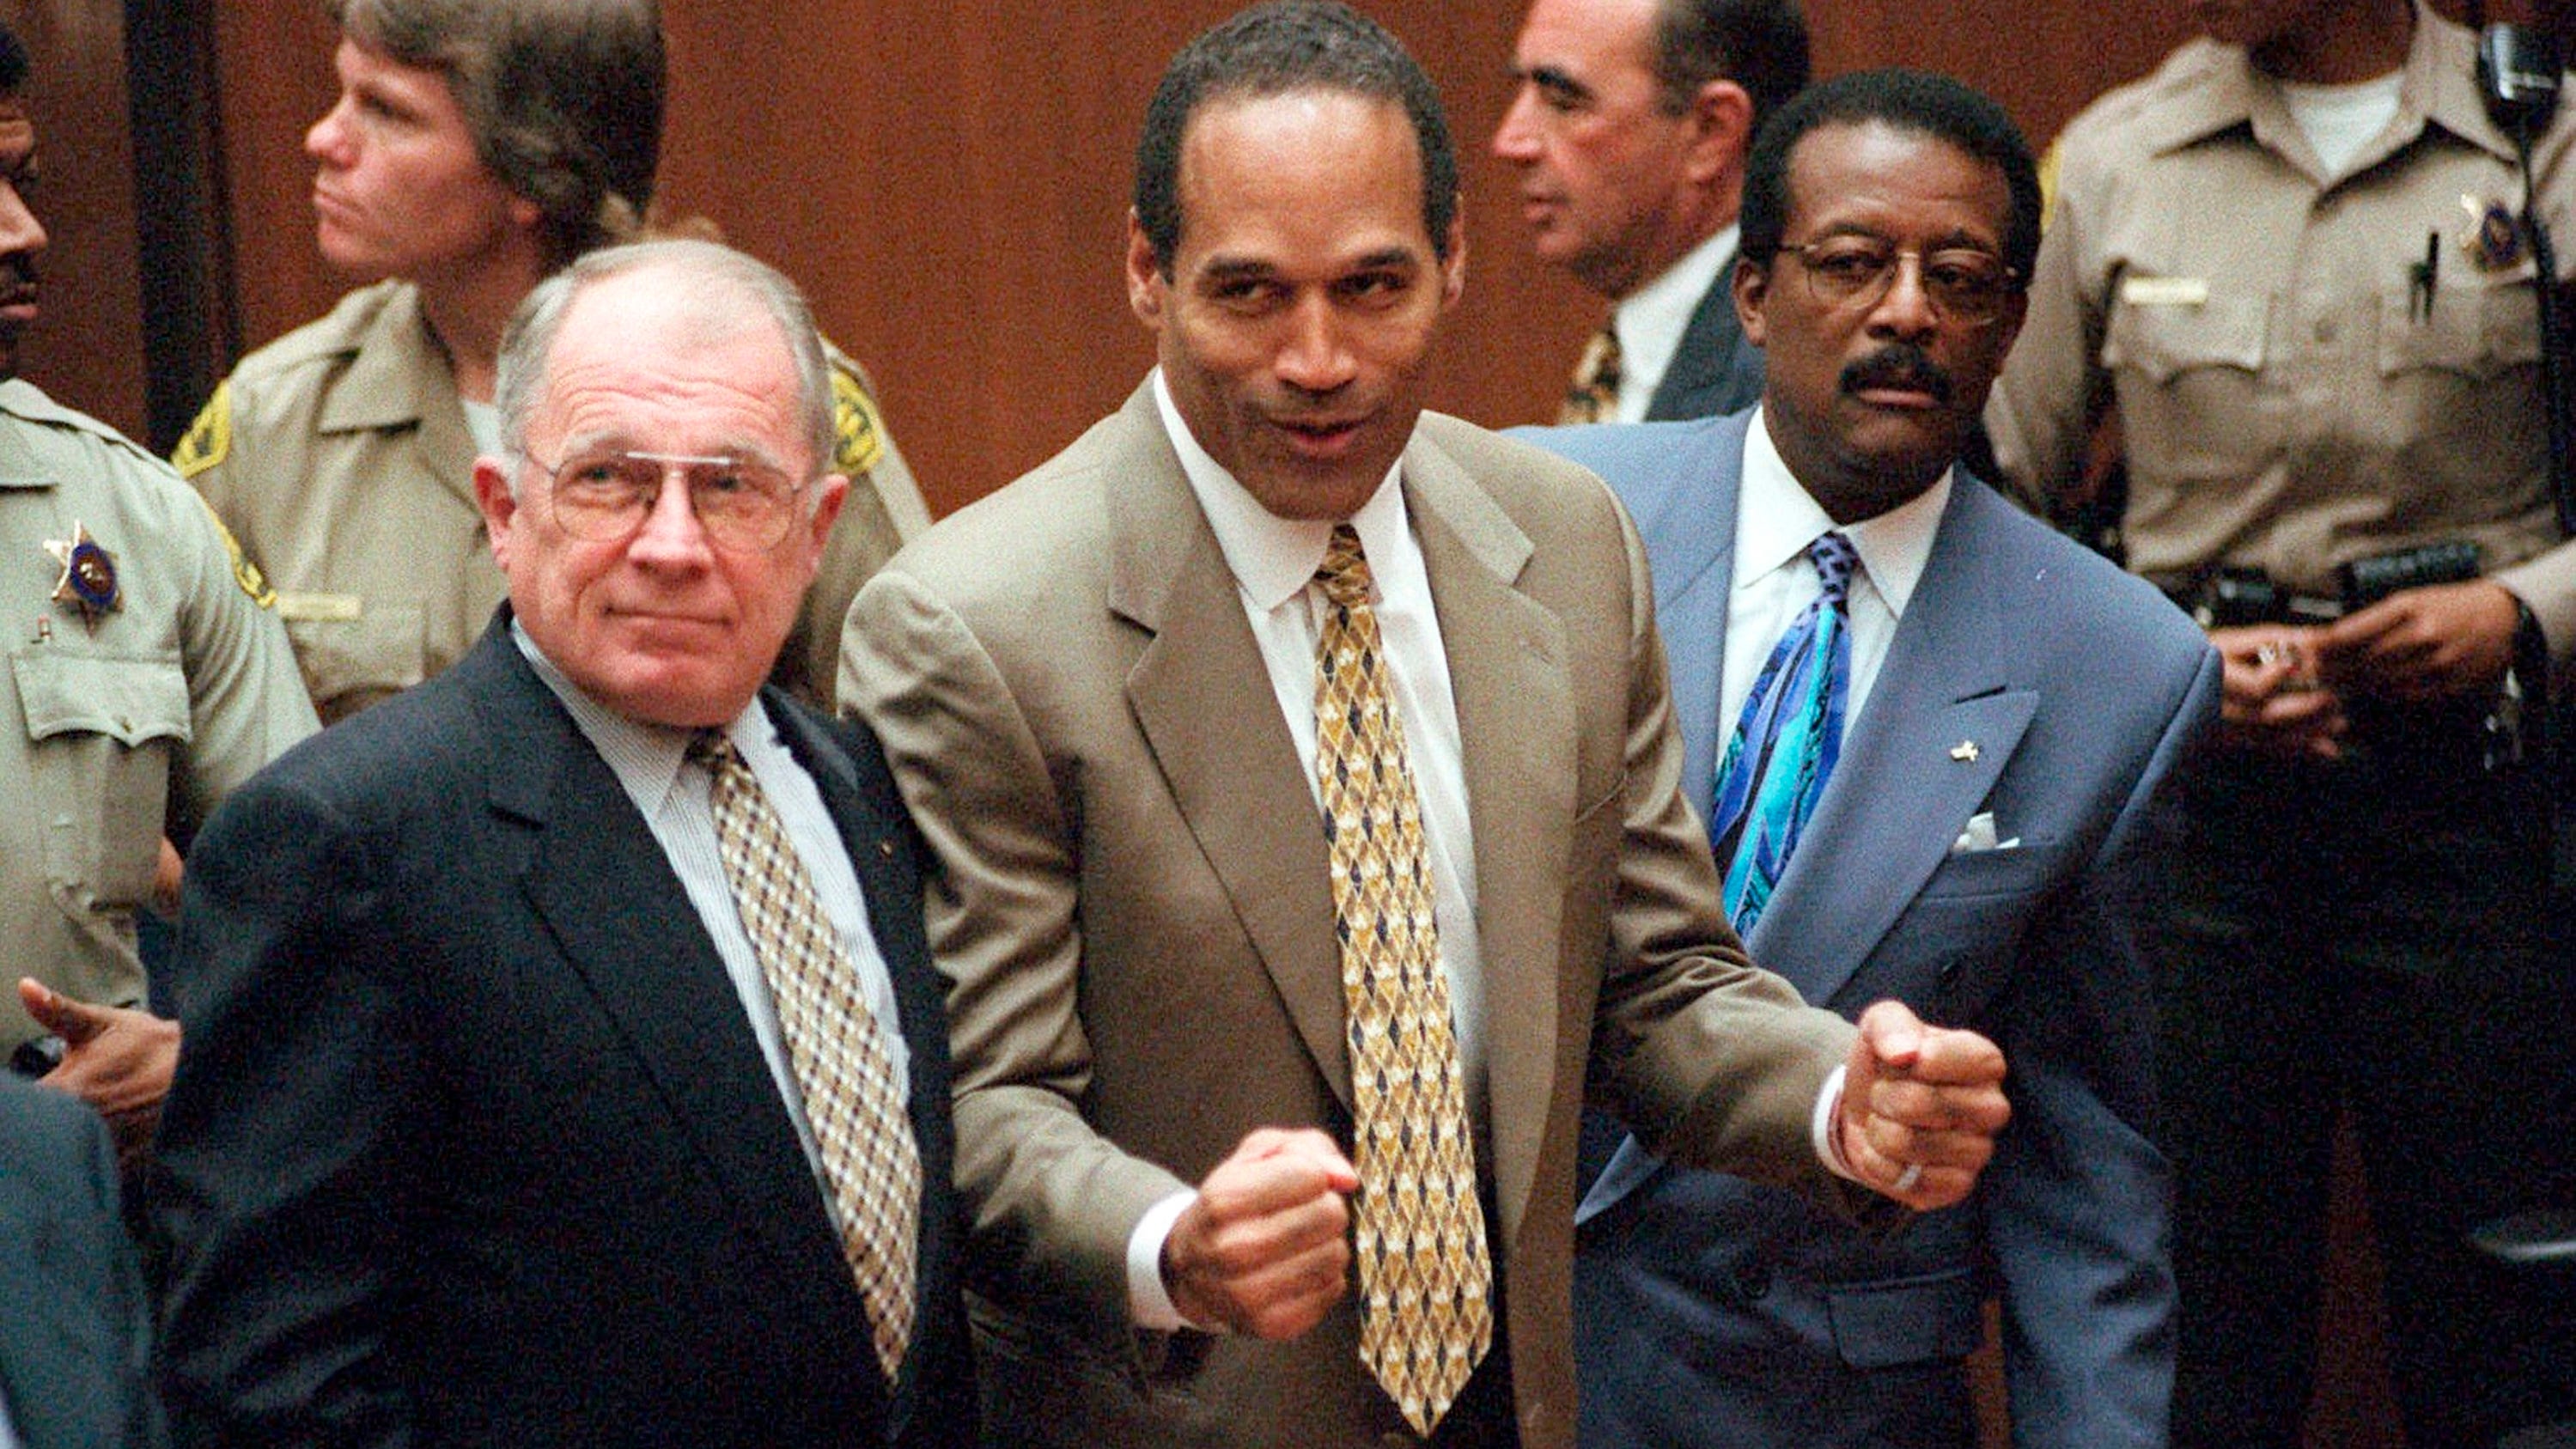 O.J. Simpson murder trial: where the key figures are now